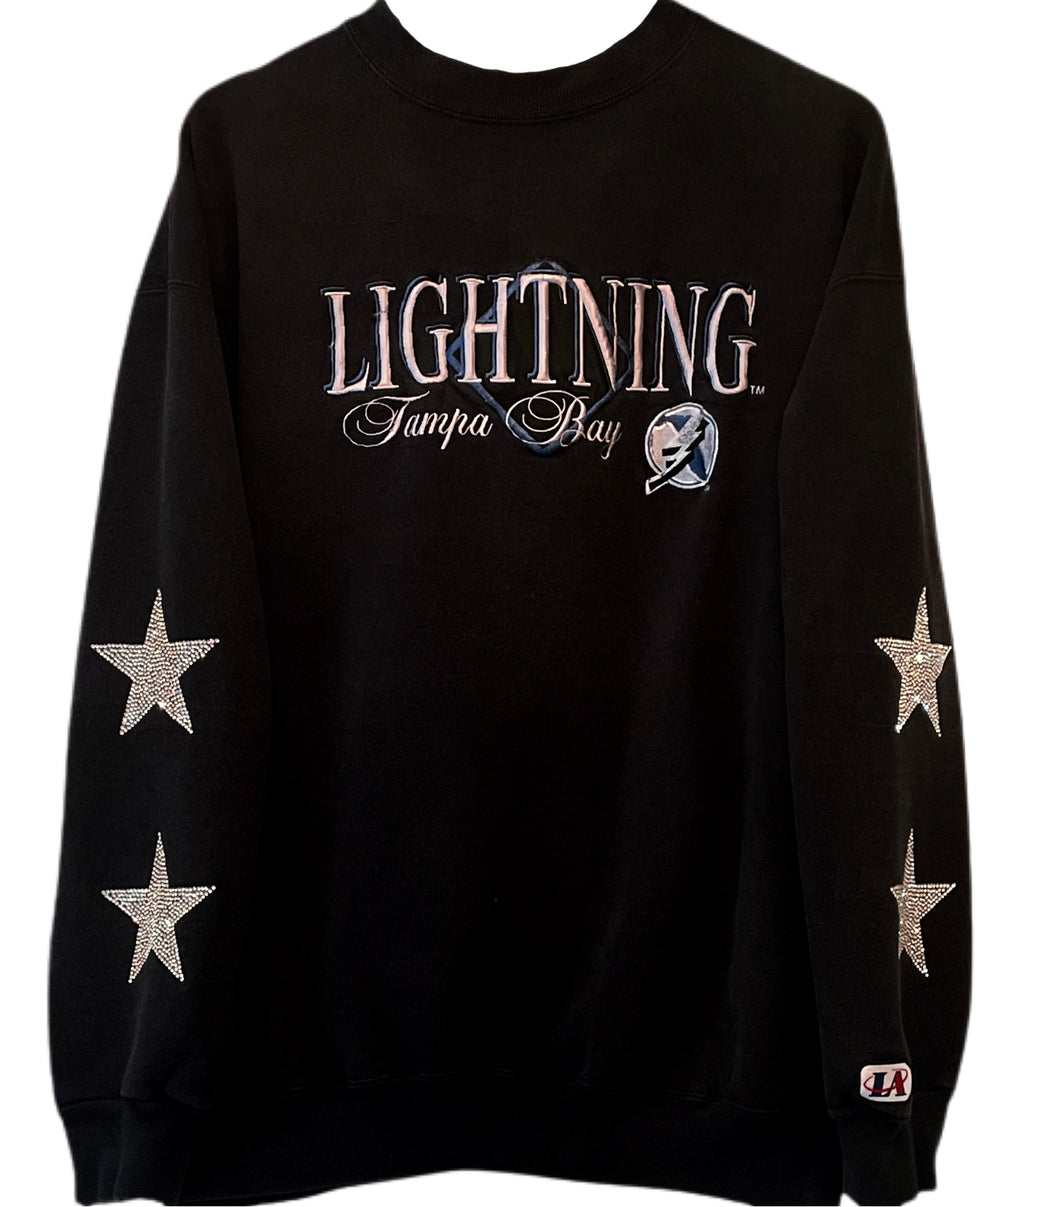 Tampa Bay Lightning, NHL One of a KIND Vintage Sweatshirt with Crystal Star Design with Custom Name & Number